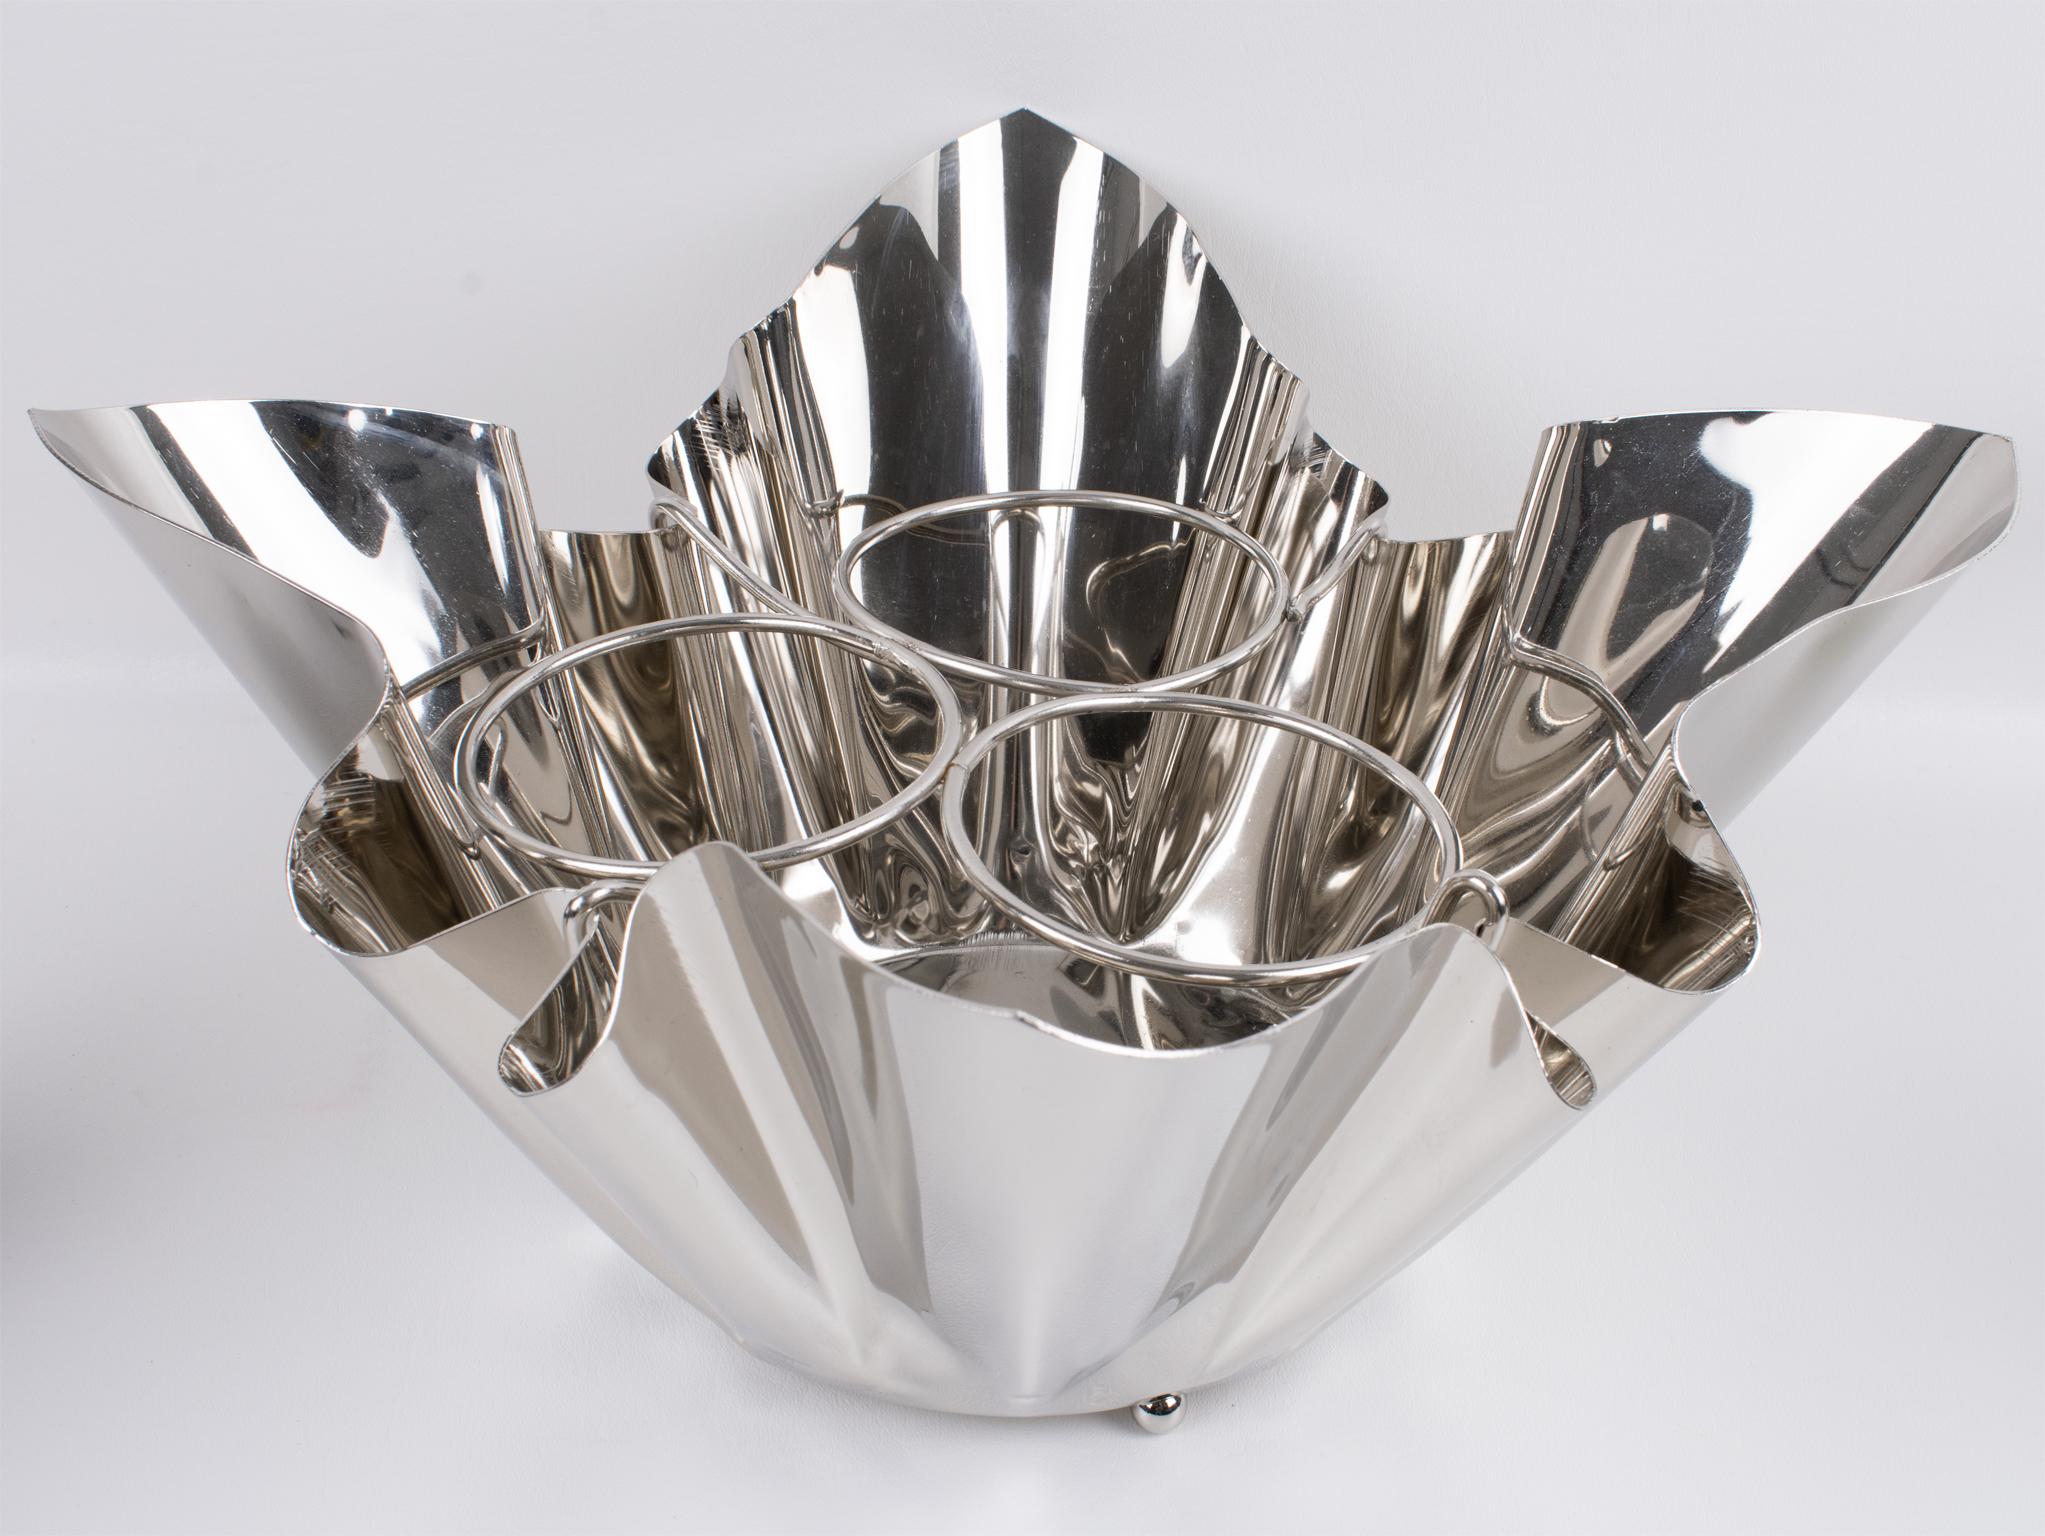 This is a stylish mid-century-modernist silver plate wine cooler or champagne ice bucket crafted in France in the 1960s. This ultra-chic bottle holder features a whimsical handkerchief shape. It has a three-bottle capacity. Willy Guhl also used this